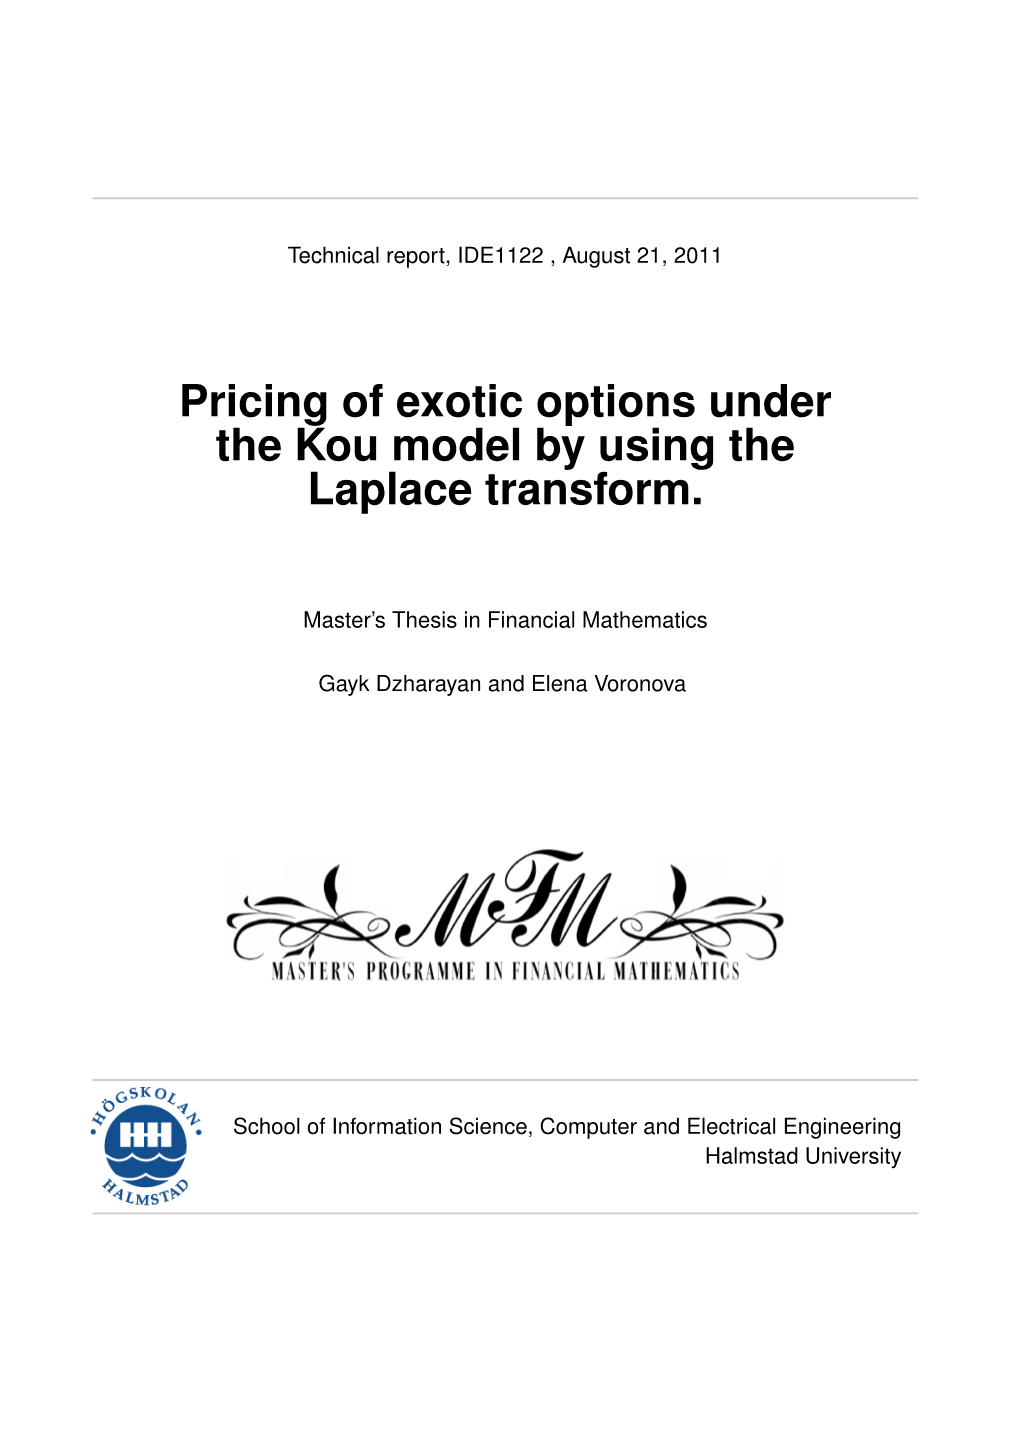 Pricing of Exotic Options Under the Kou Model by Using the Laplace Transform